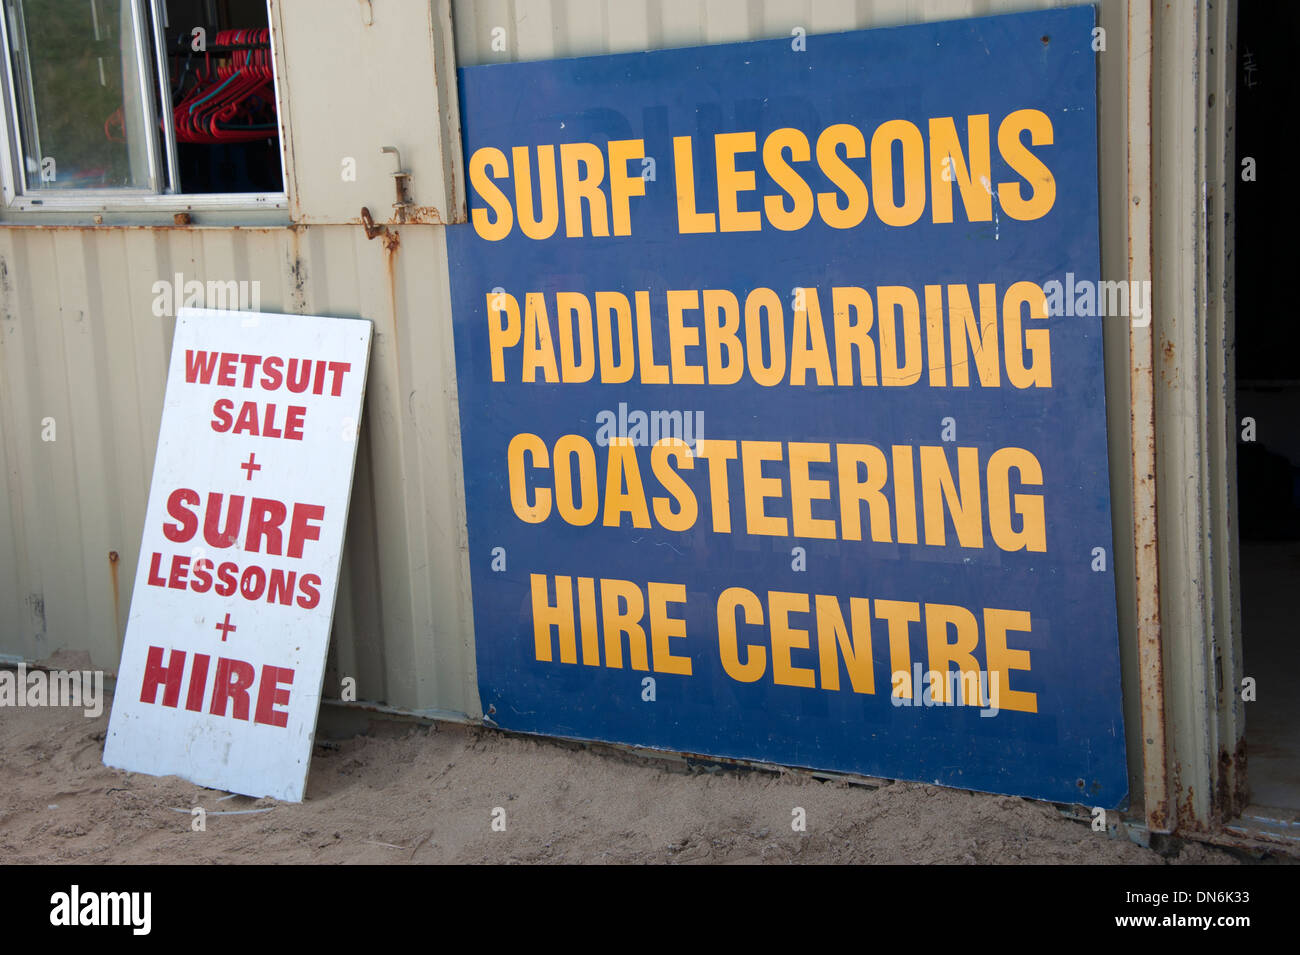 Surf Lessons Sign Wetsuit Hire Coasteering Stock Photo